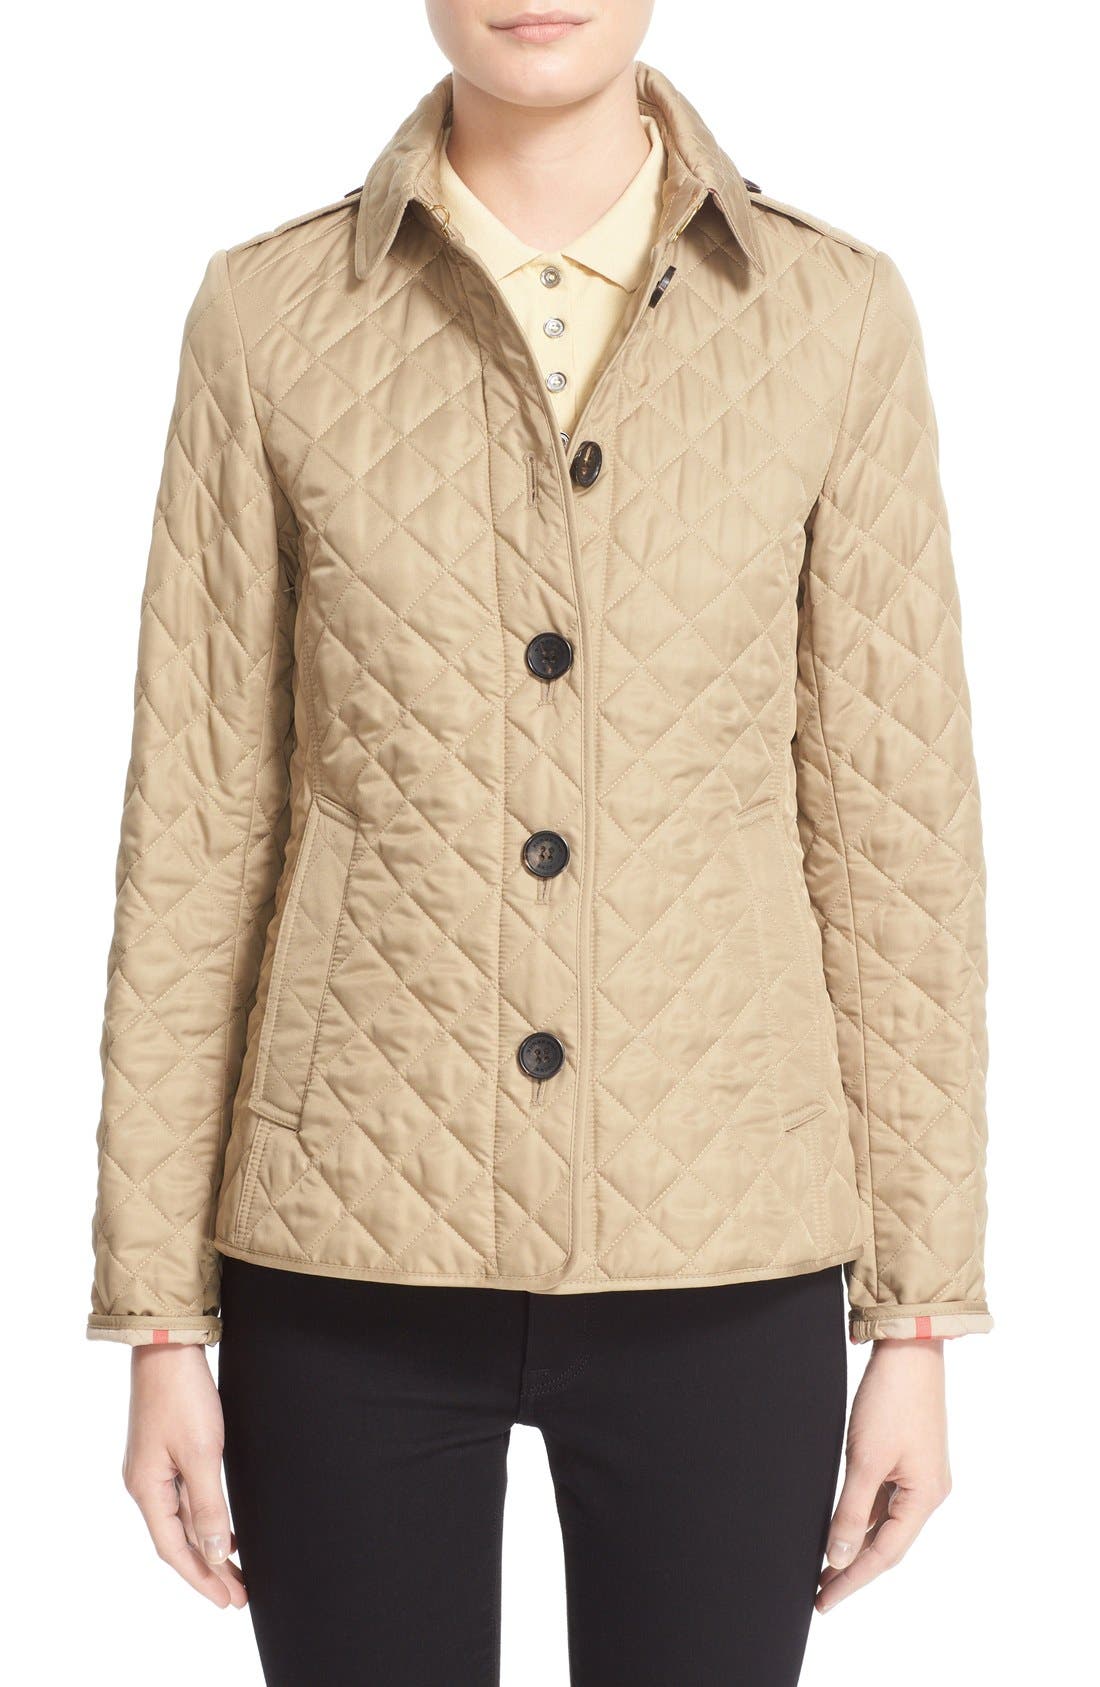 burberry women's coats and jackets